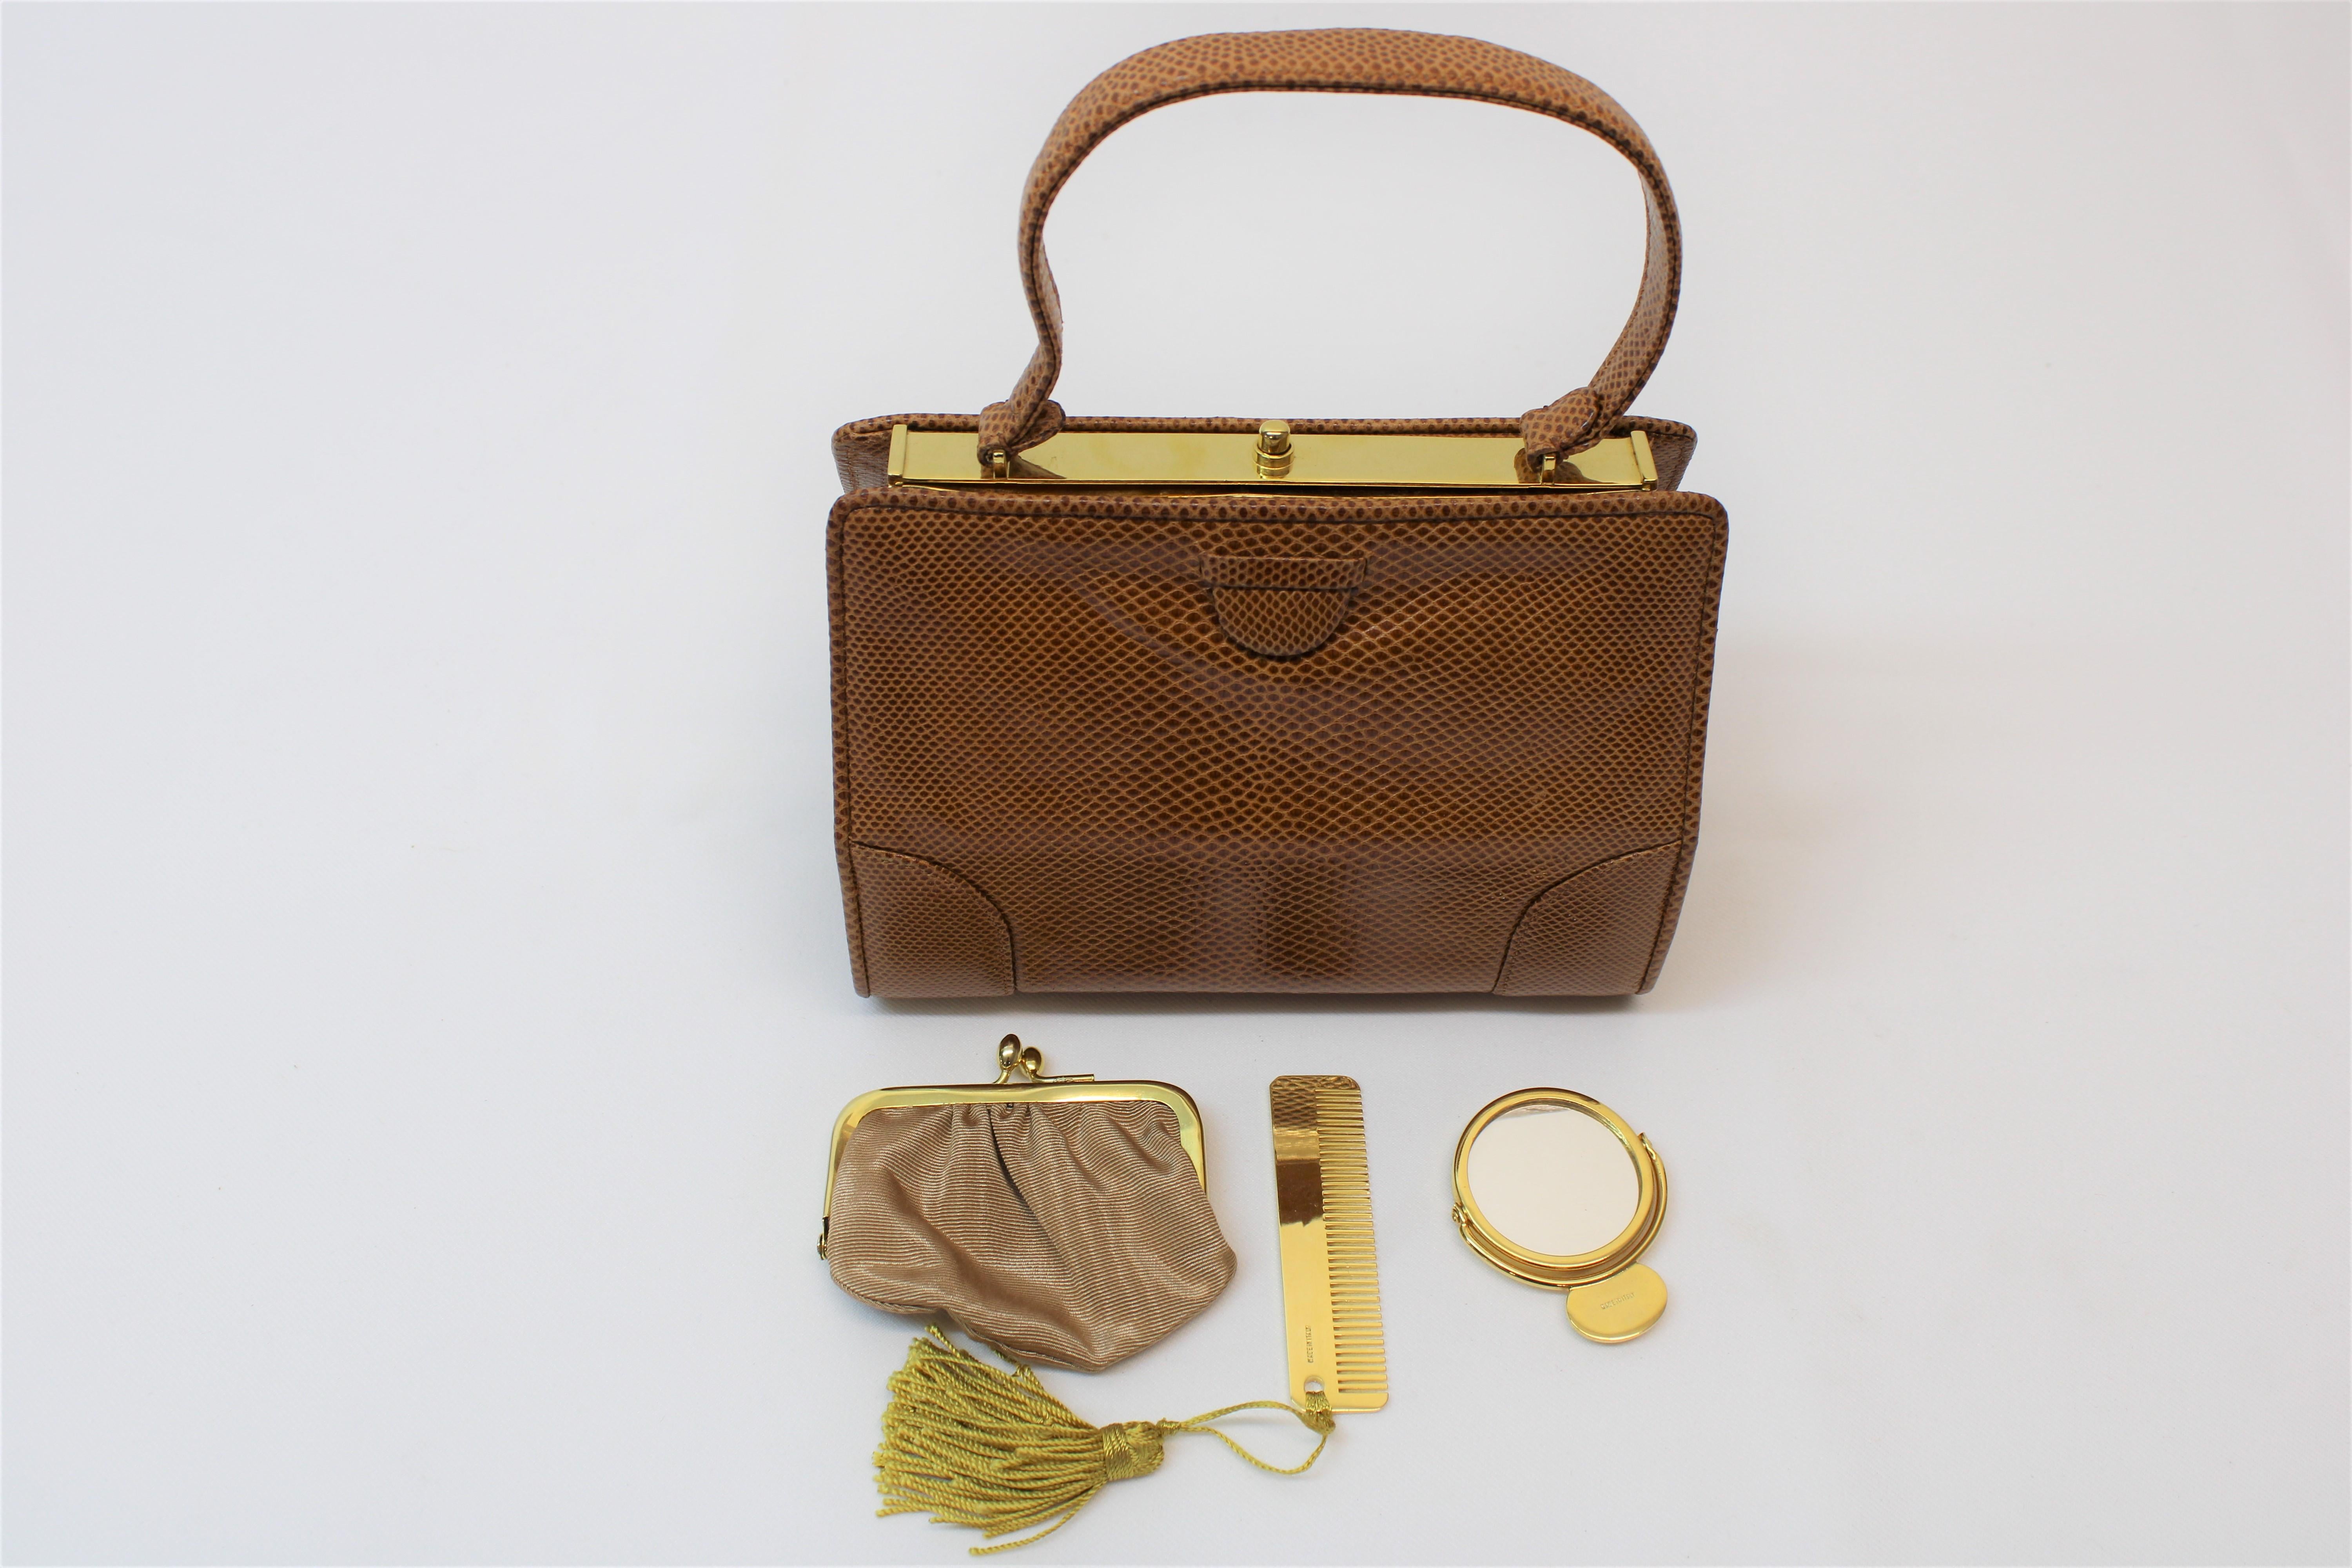 Judith Leiber Brown Purse In Good Condition For Sale In San Francisco, CA